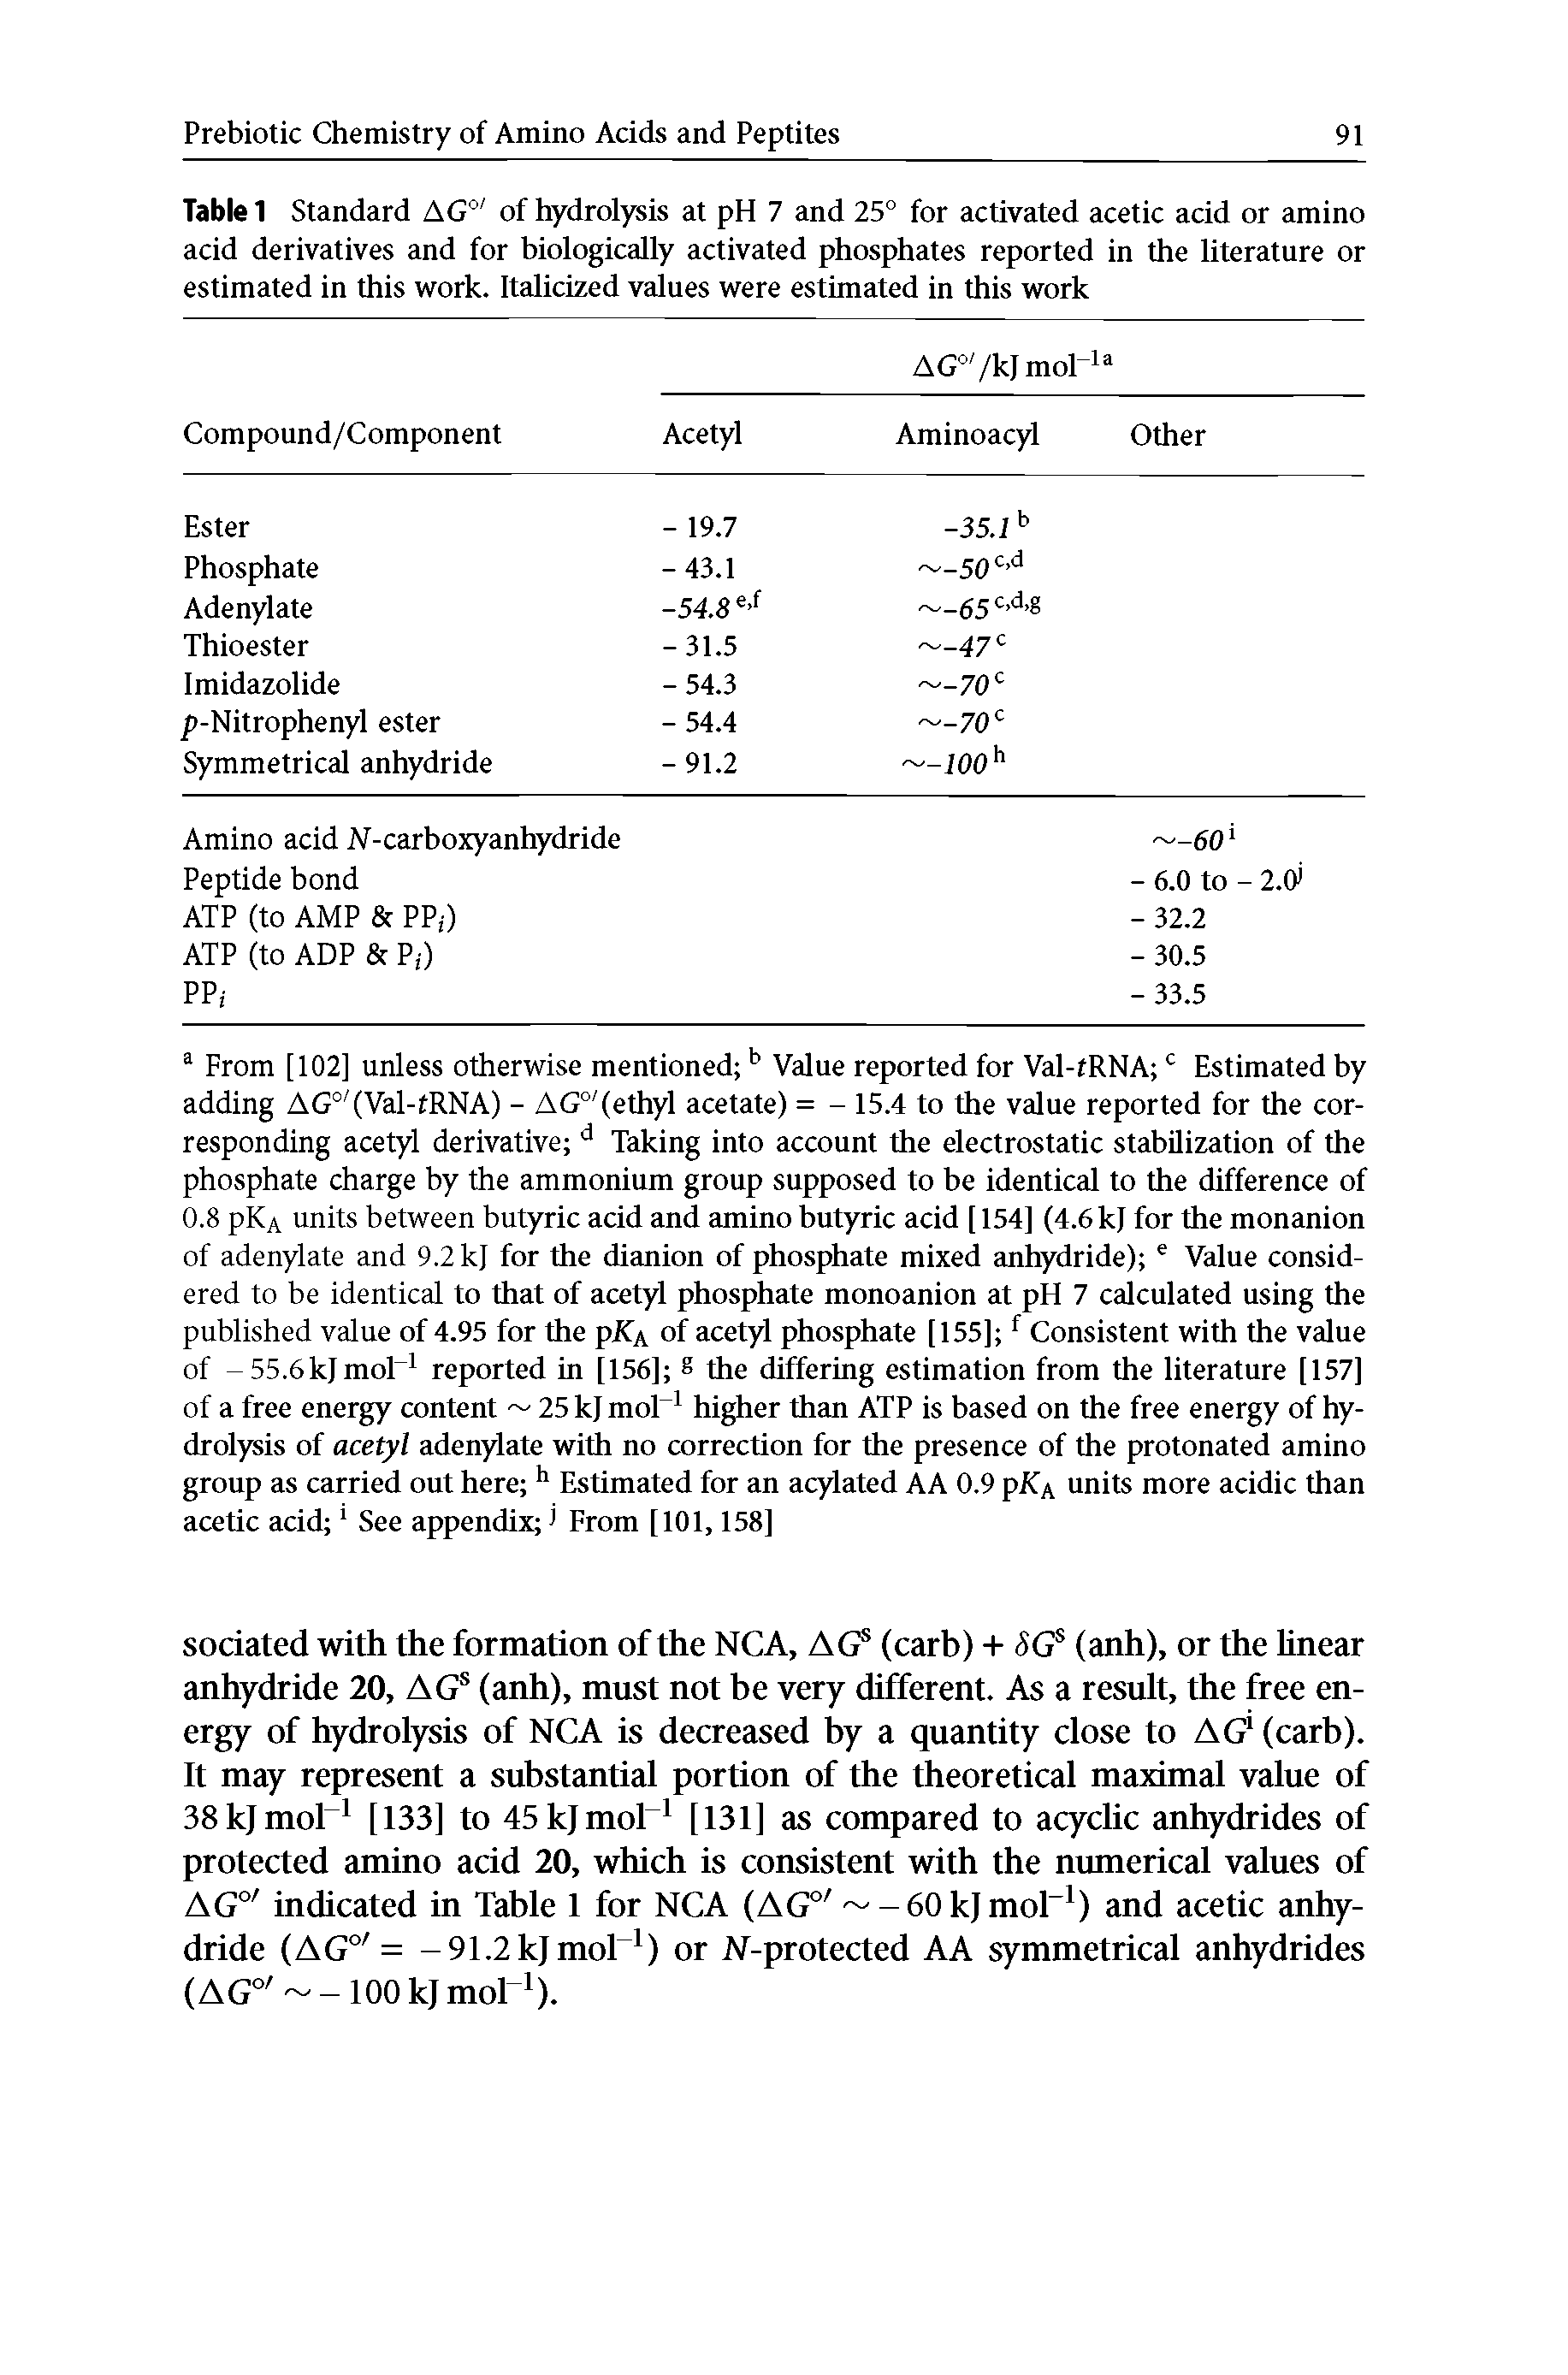 Table 1 Standard AG0 of hydrolysis at pH 7 and 25° for activated acetic acid or amino acid derivatives and for biologically activated phosphates reported in the literature or estimated in this work. Italicized values were estimated in this work ...